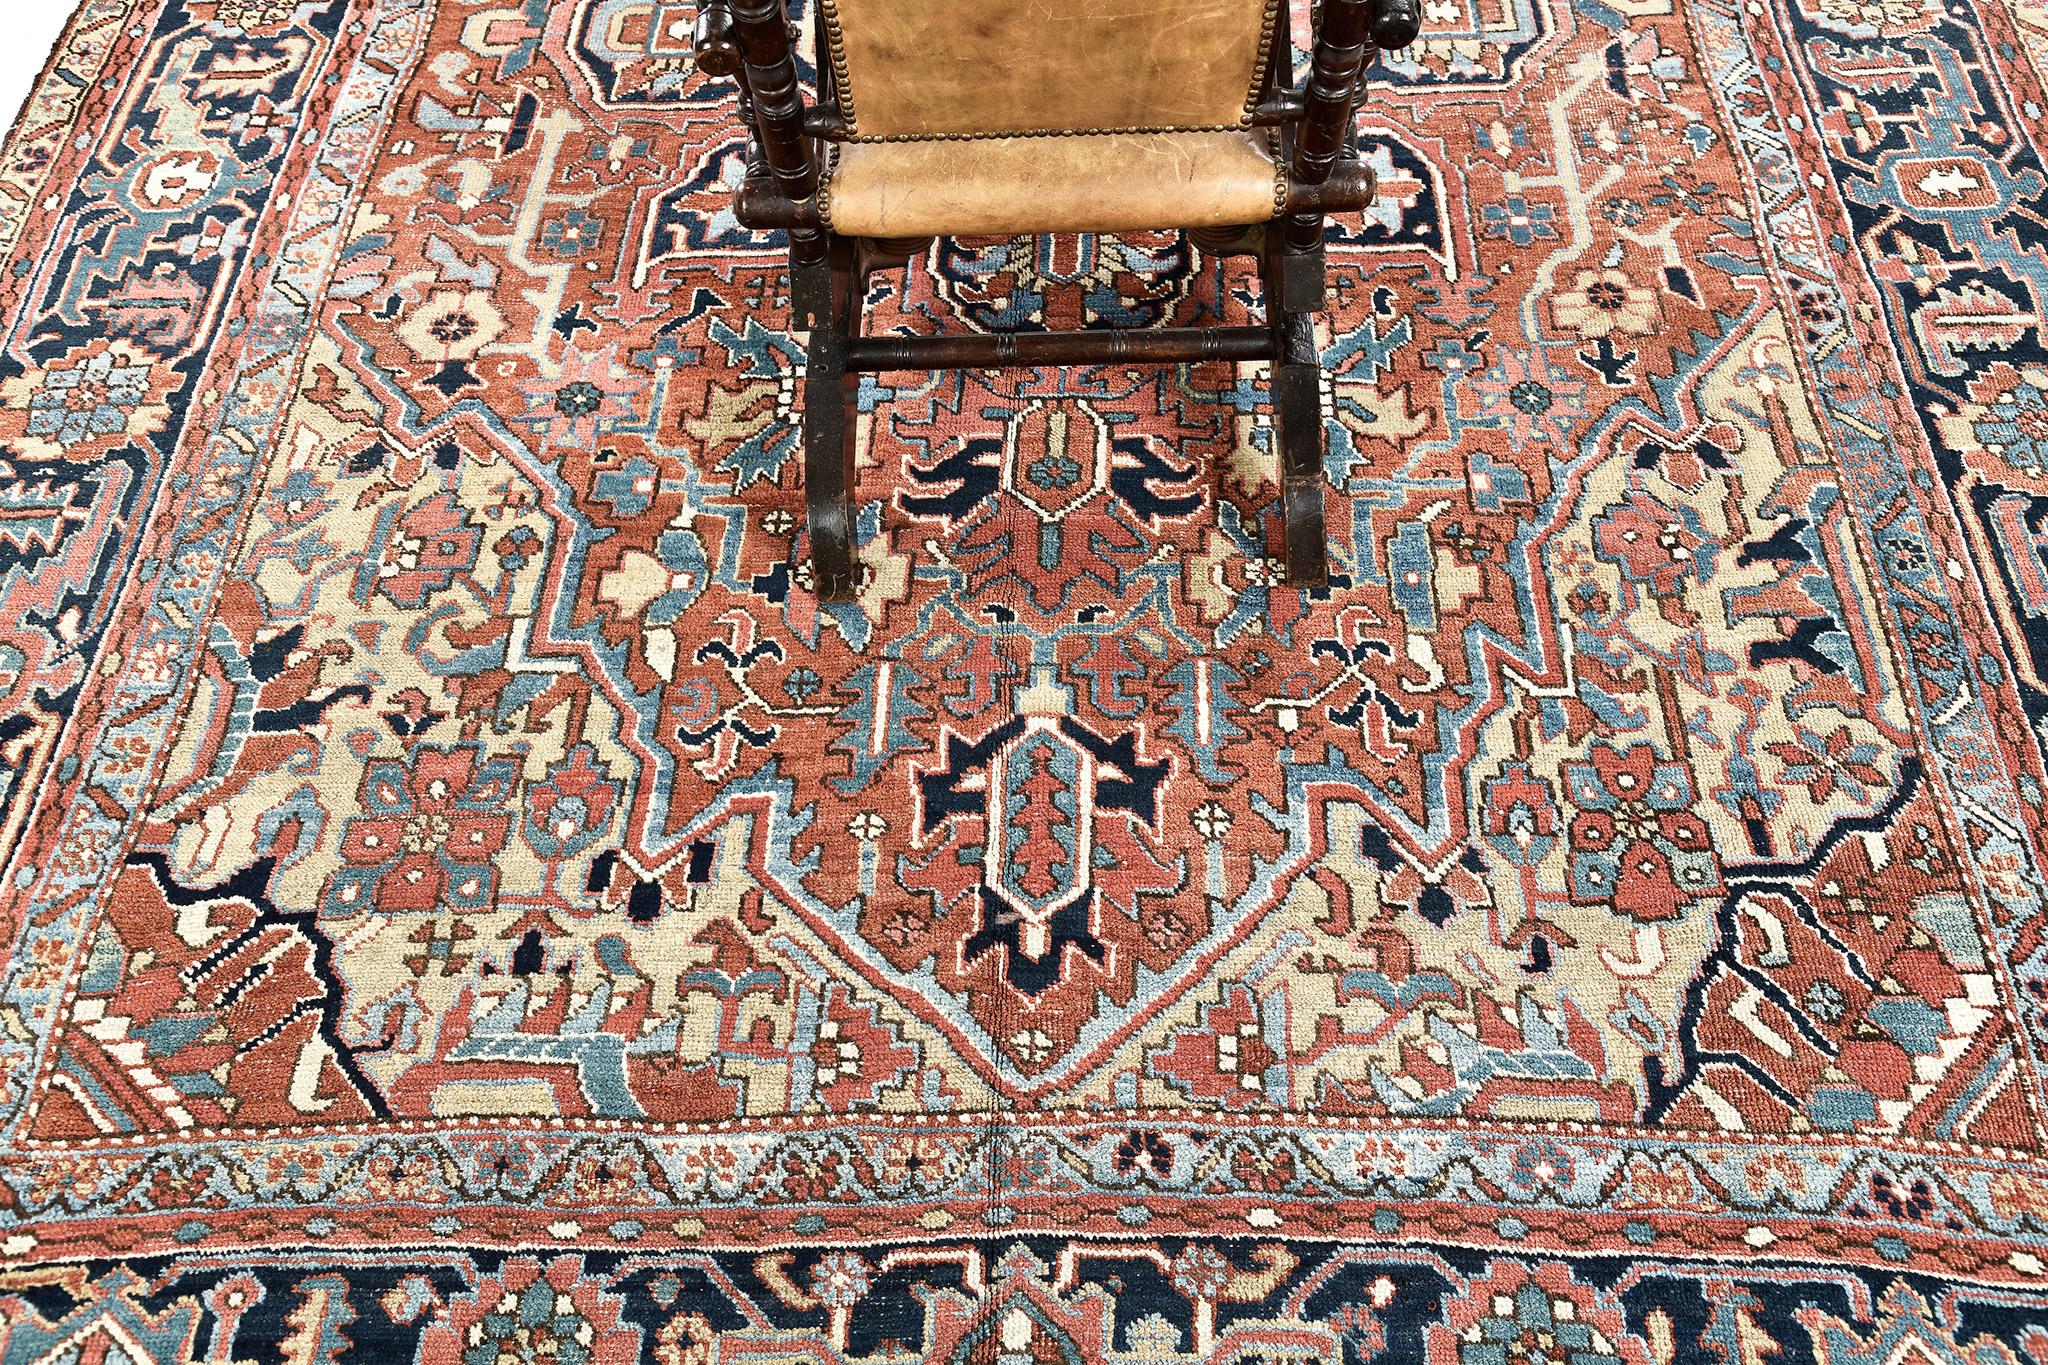 A luxurious Heriz Serapi rug that has a beauty of rectilinear designs with combinations of blue, yellow, red florid designs, pendants, center medallion and guard stripes. It consists of different representations that makes the carpet looks